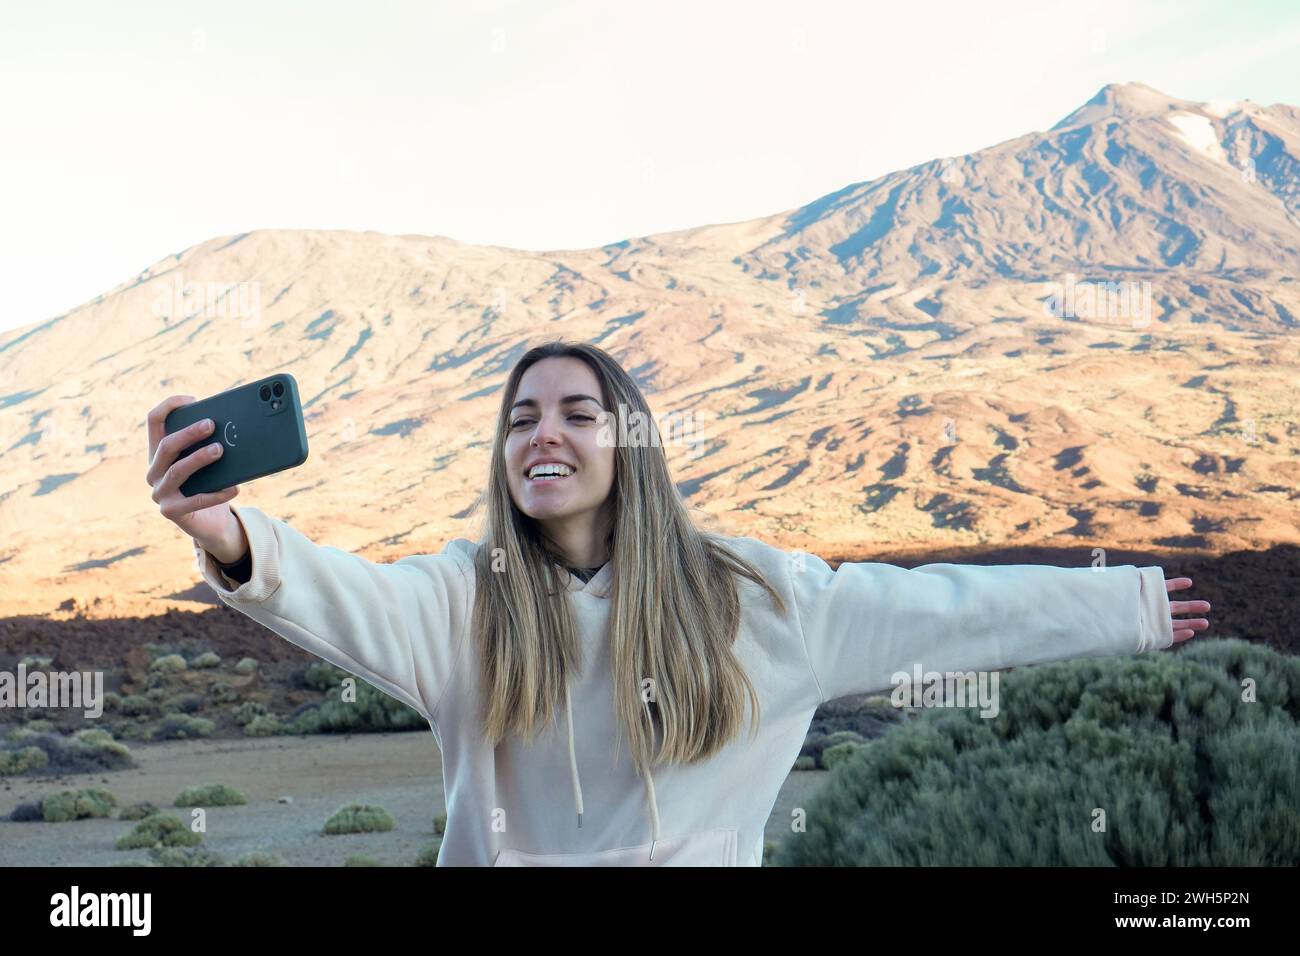 A joyful woman in a white hoodie is capturing a selfie with the majestic Teide mountain bathed in the warm glow of the evening sun. Stock Photo